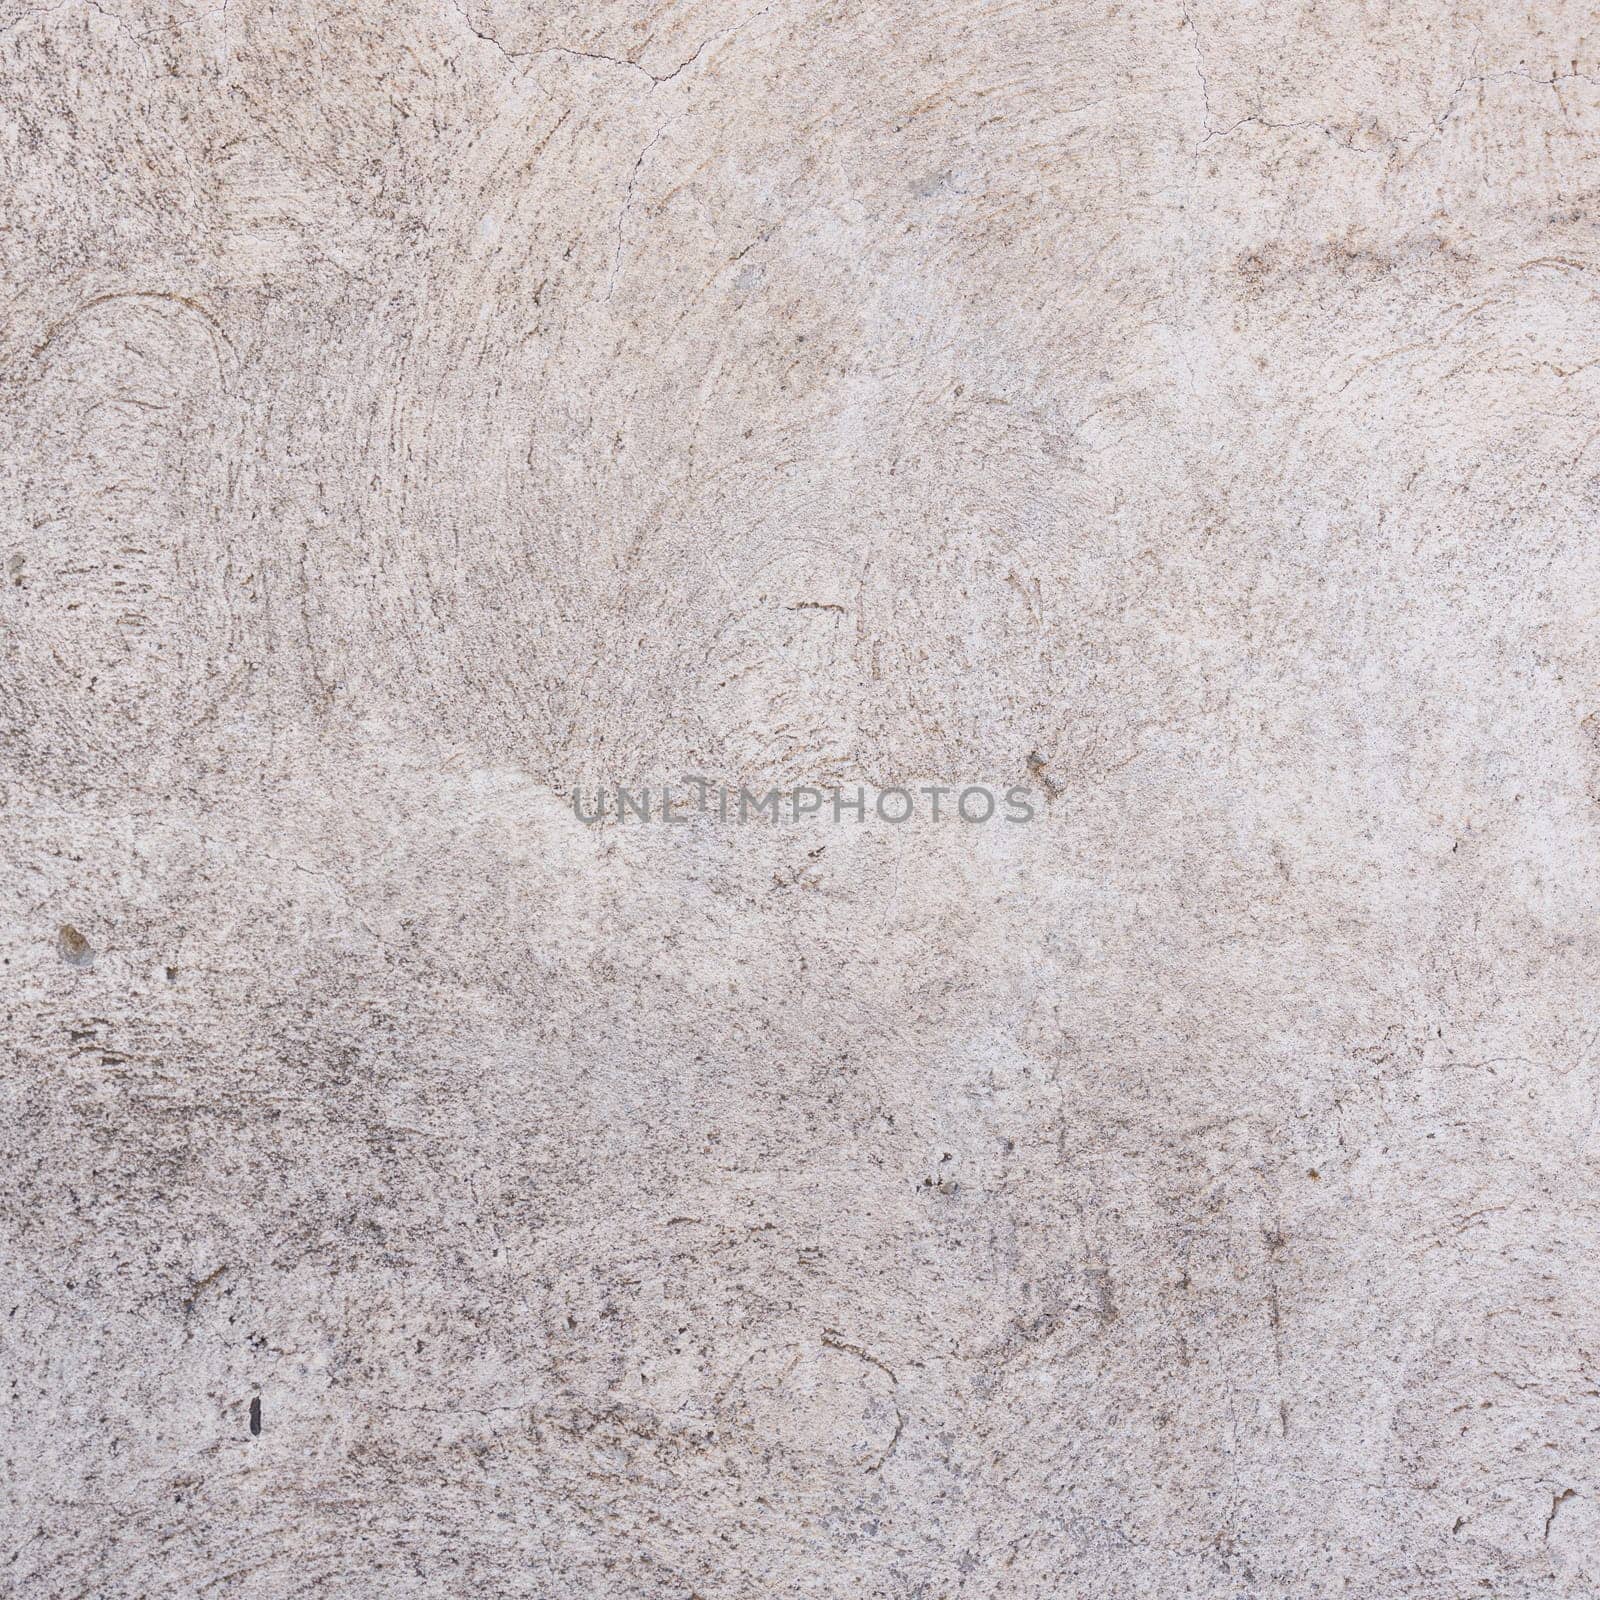 closeup full-frame flat background and texture of solid smeared concrete surface by z1b